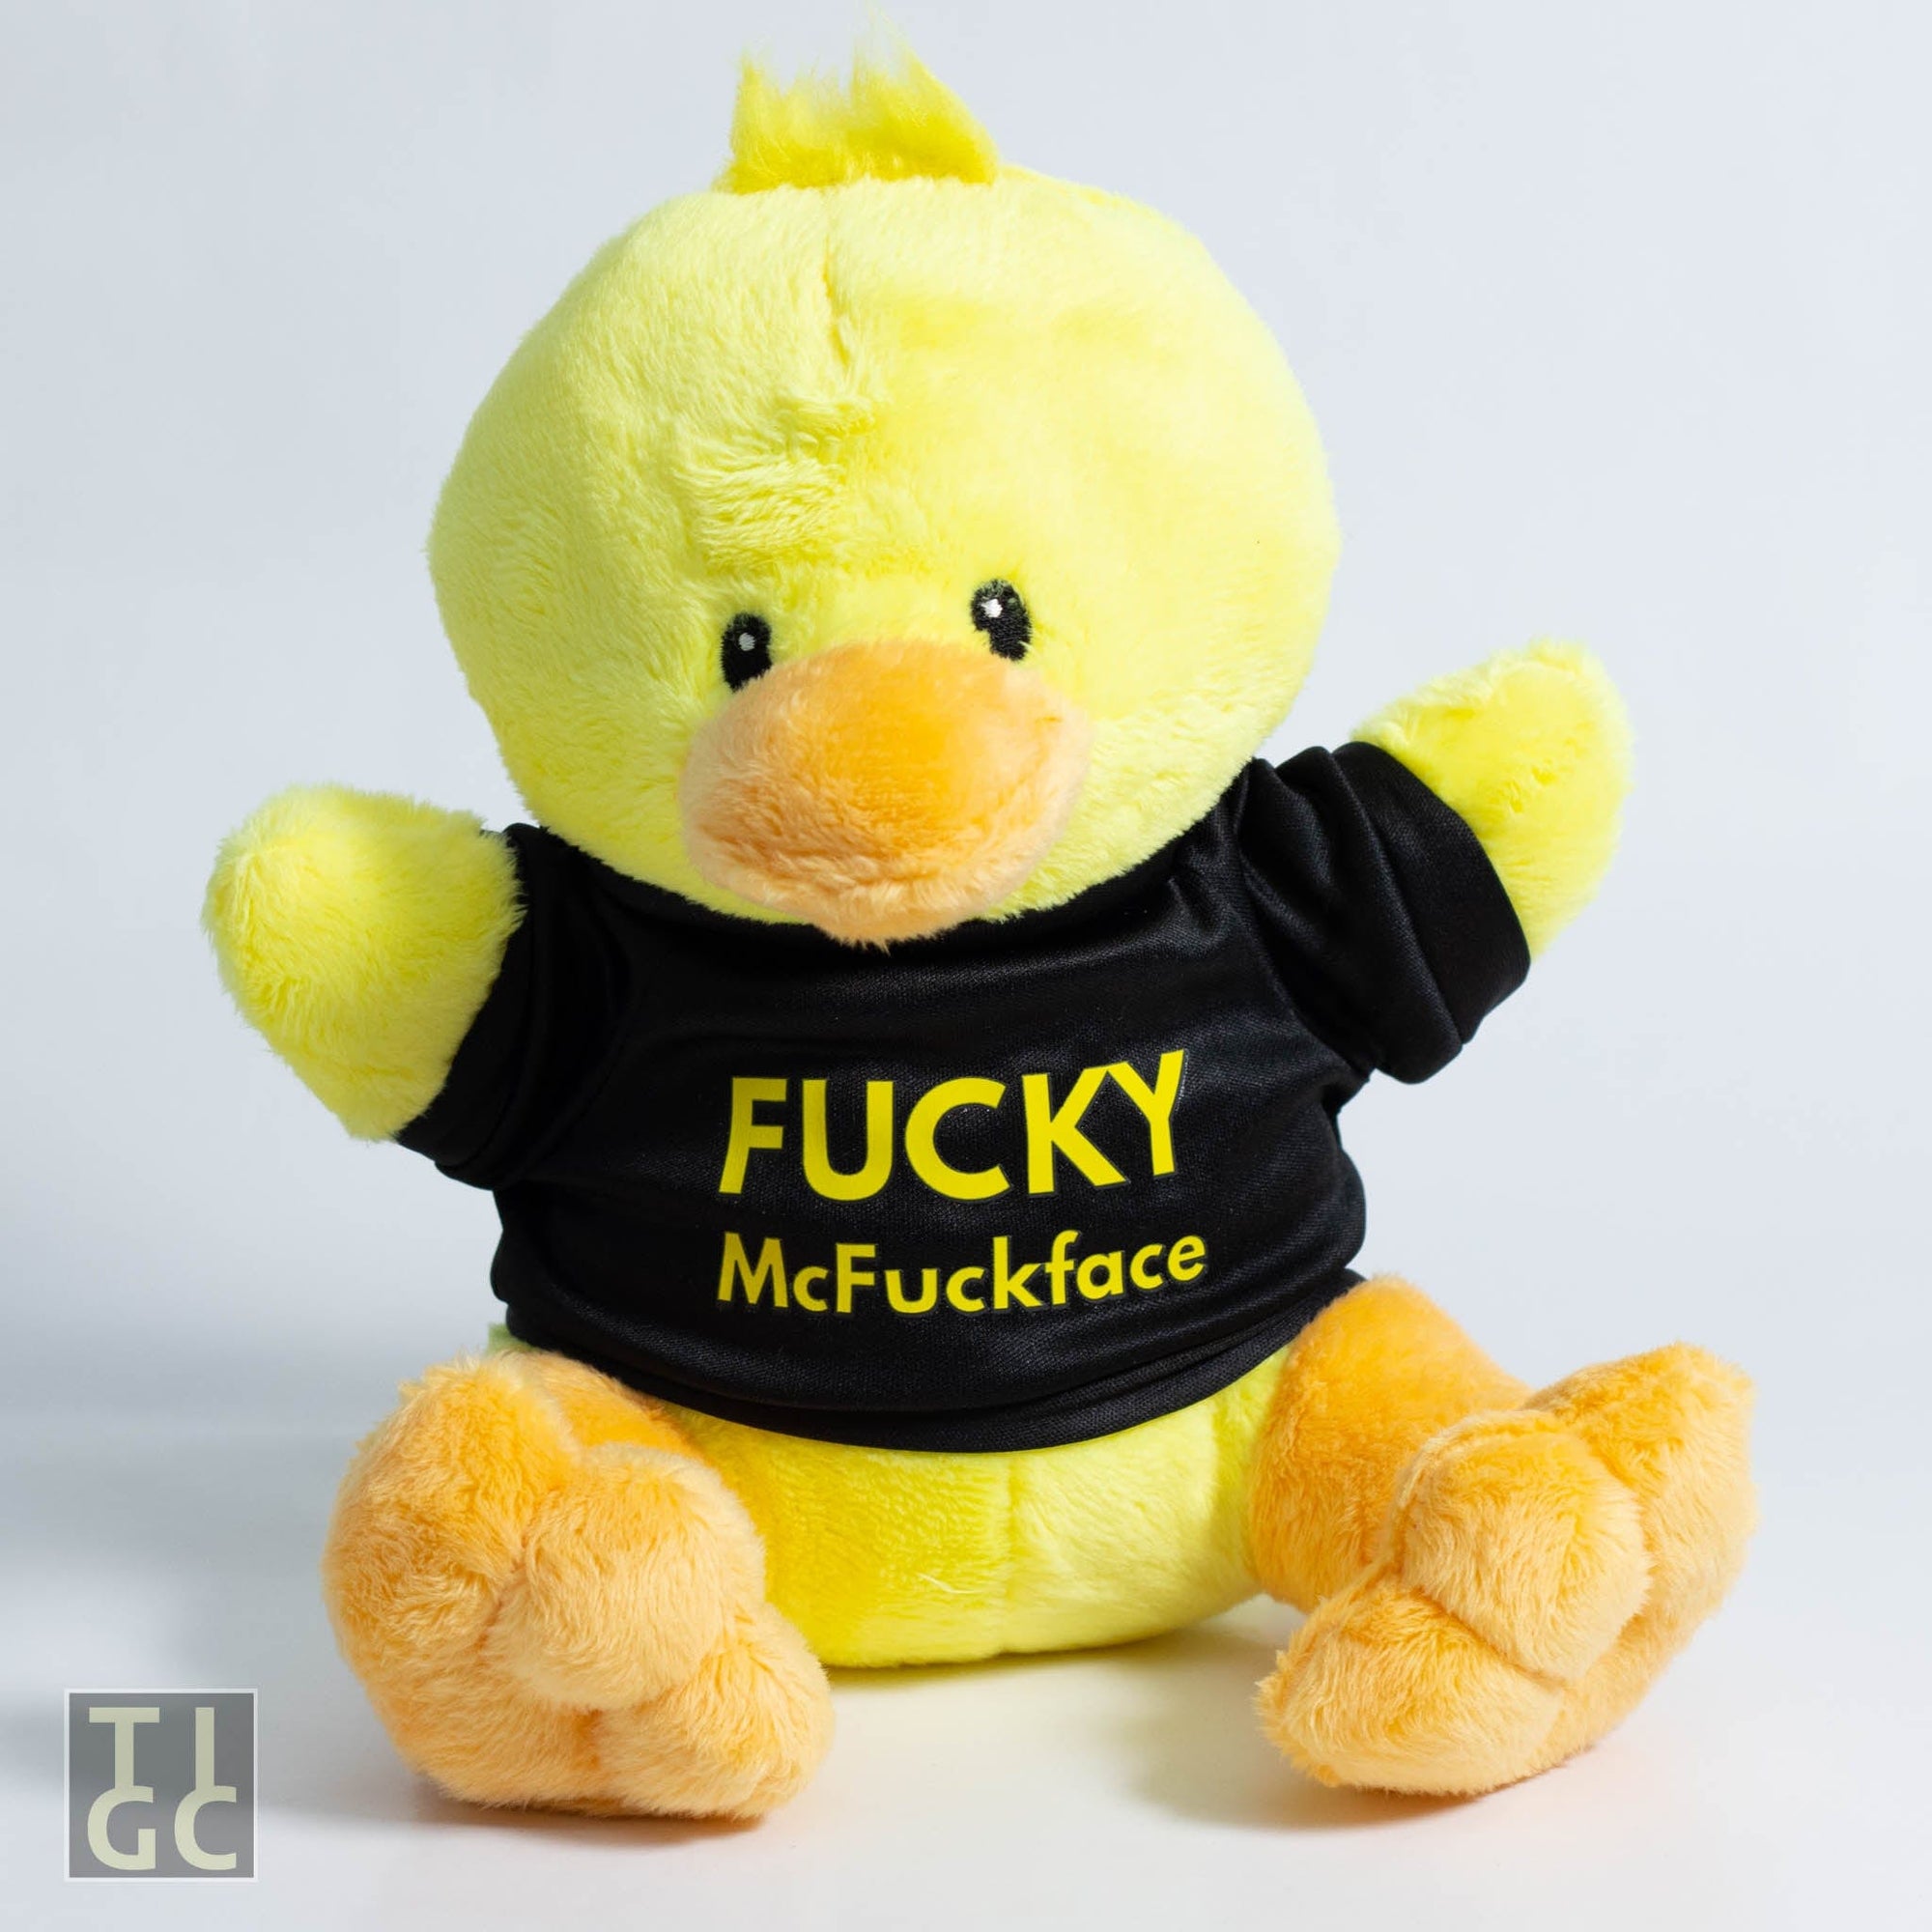 TIGC The Inappropriate Gift Co Fucky McFuckface Duck